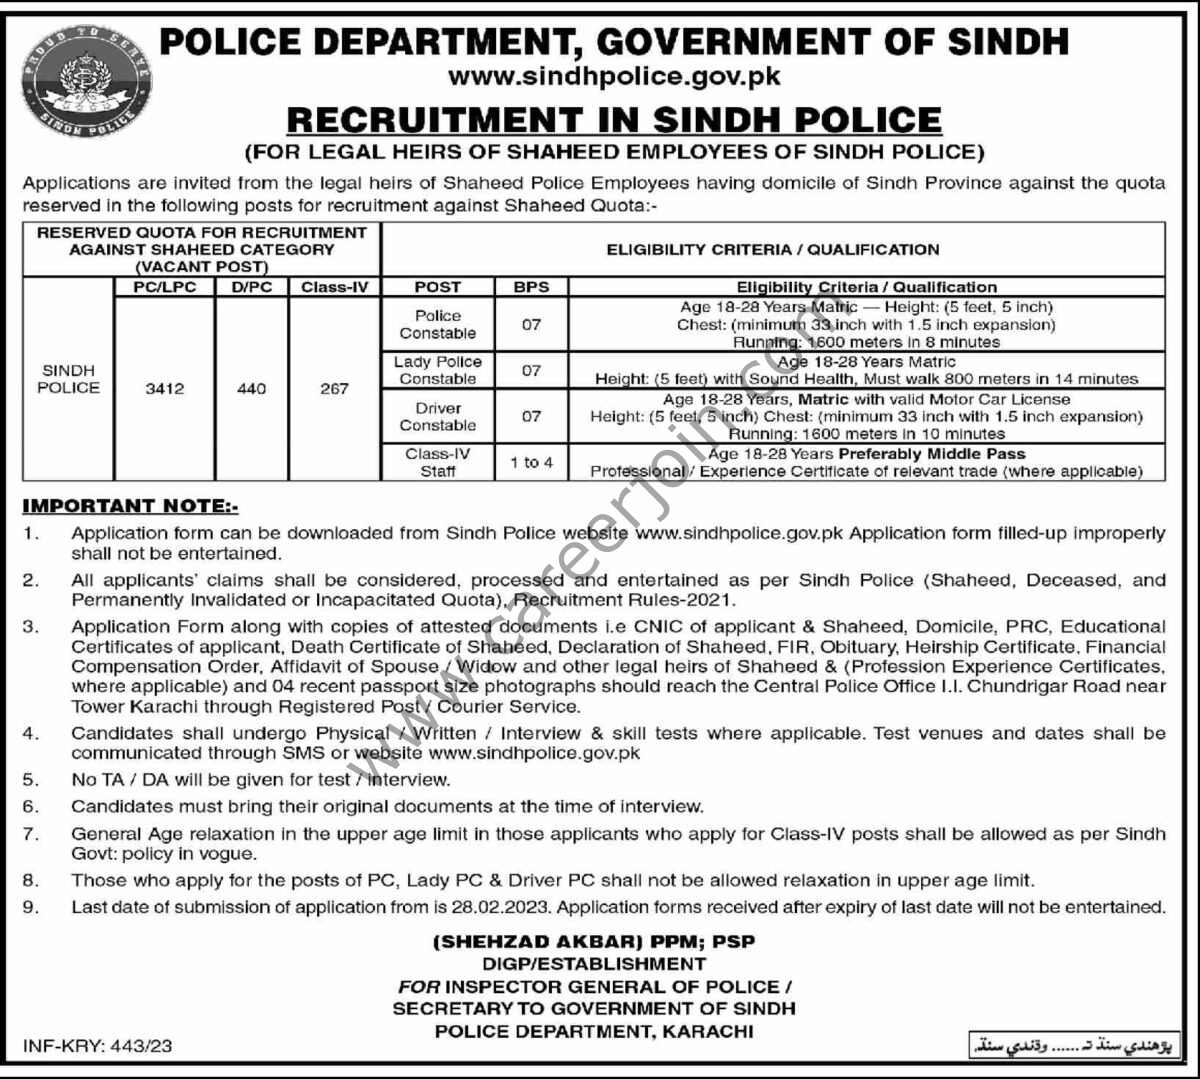 Police Department Govt of Sindh Jobs 09 February 2023 Dawn 1222123123